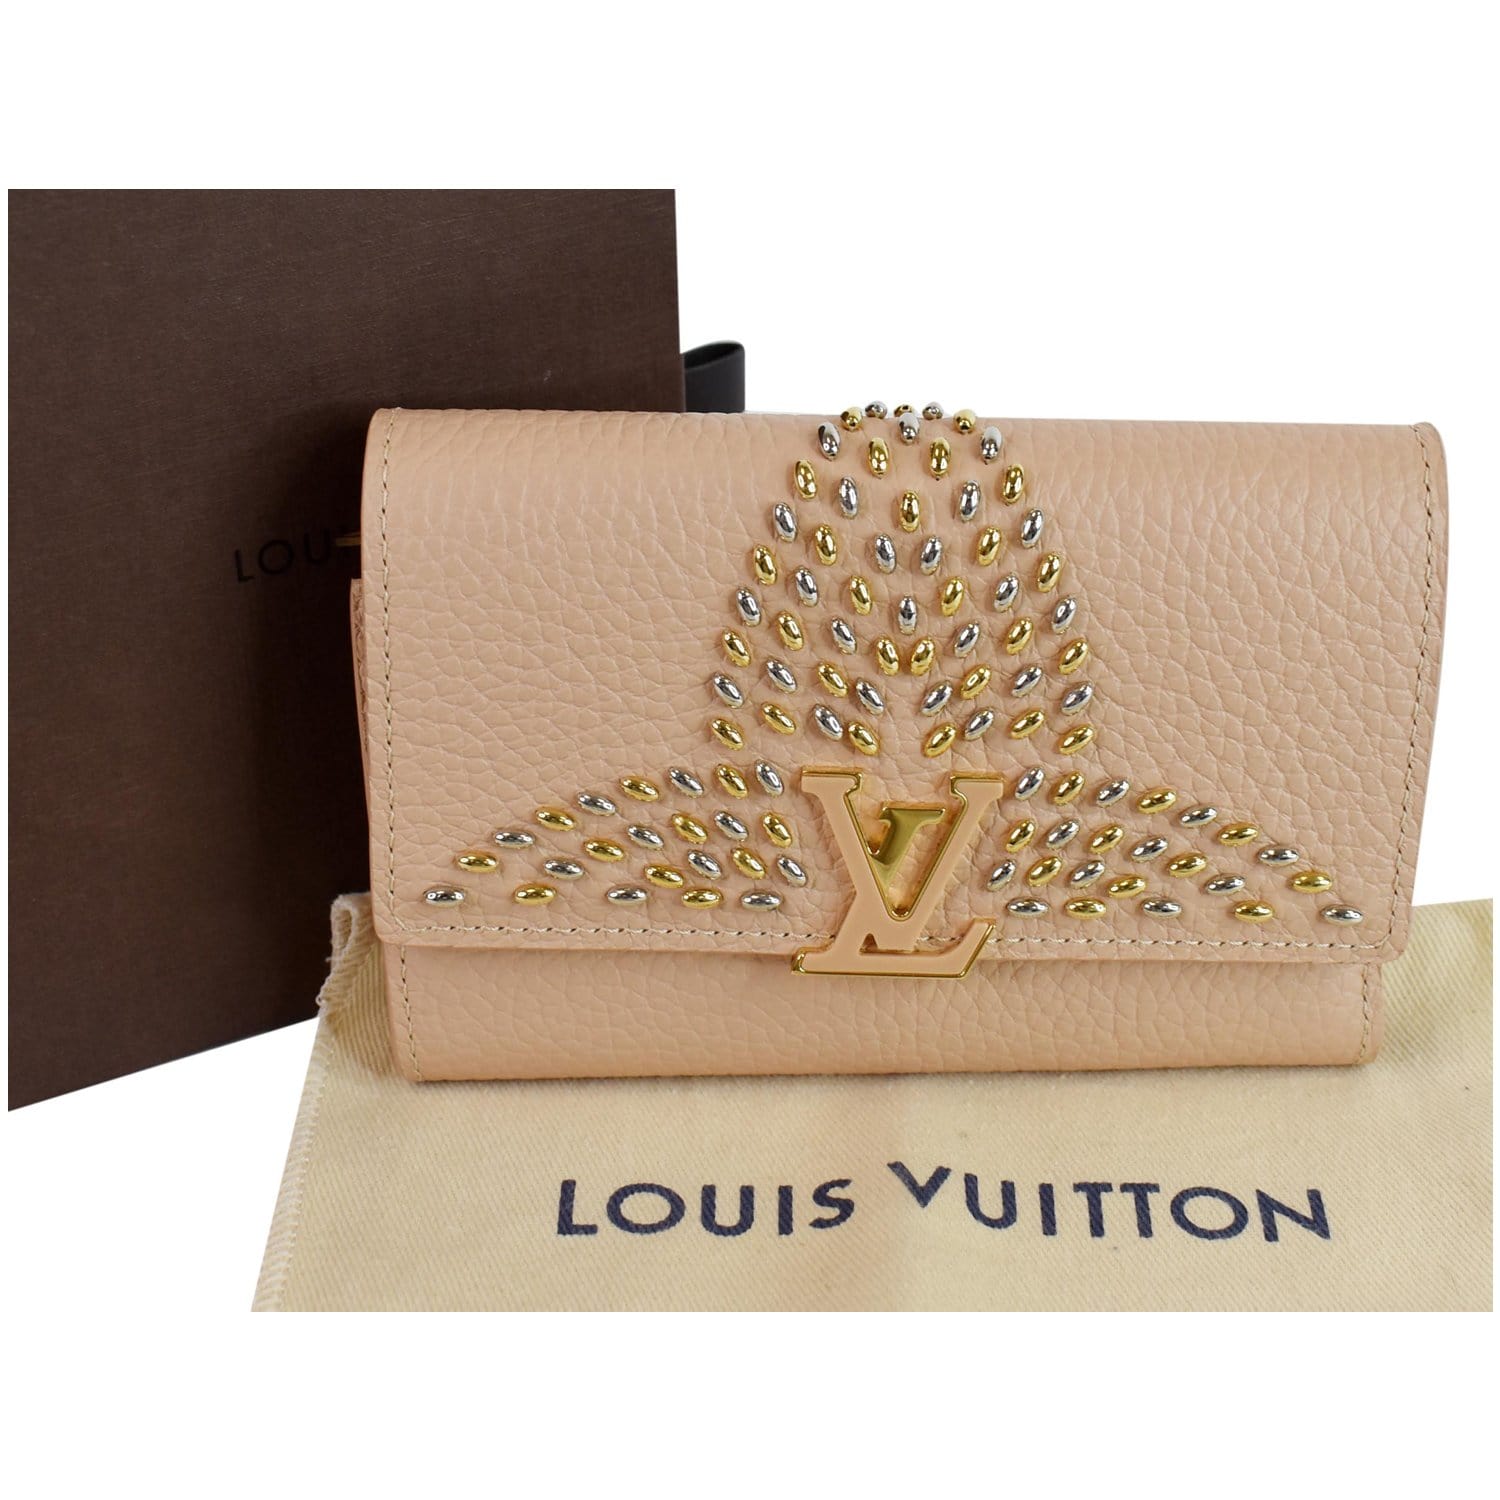 Louis Vuitton Capucines Studded Compact Leather Wallet Peach